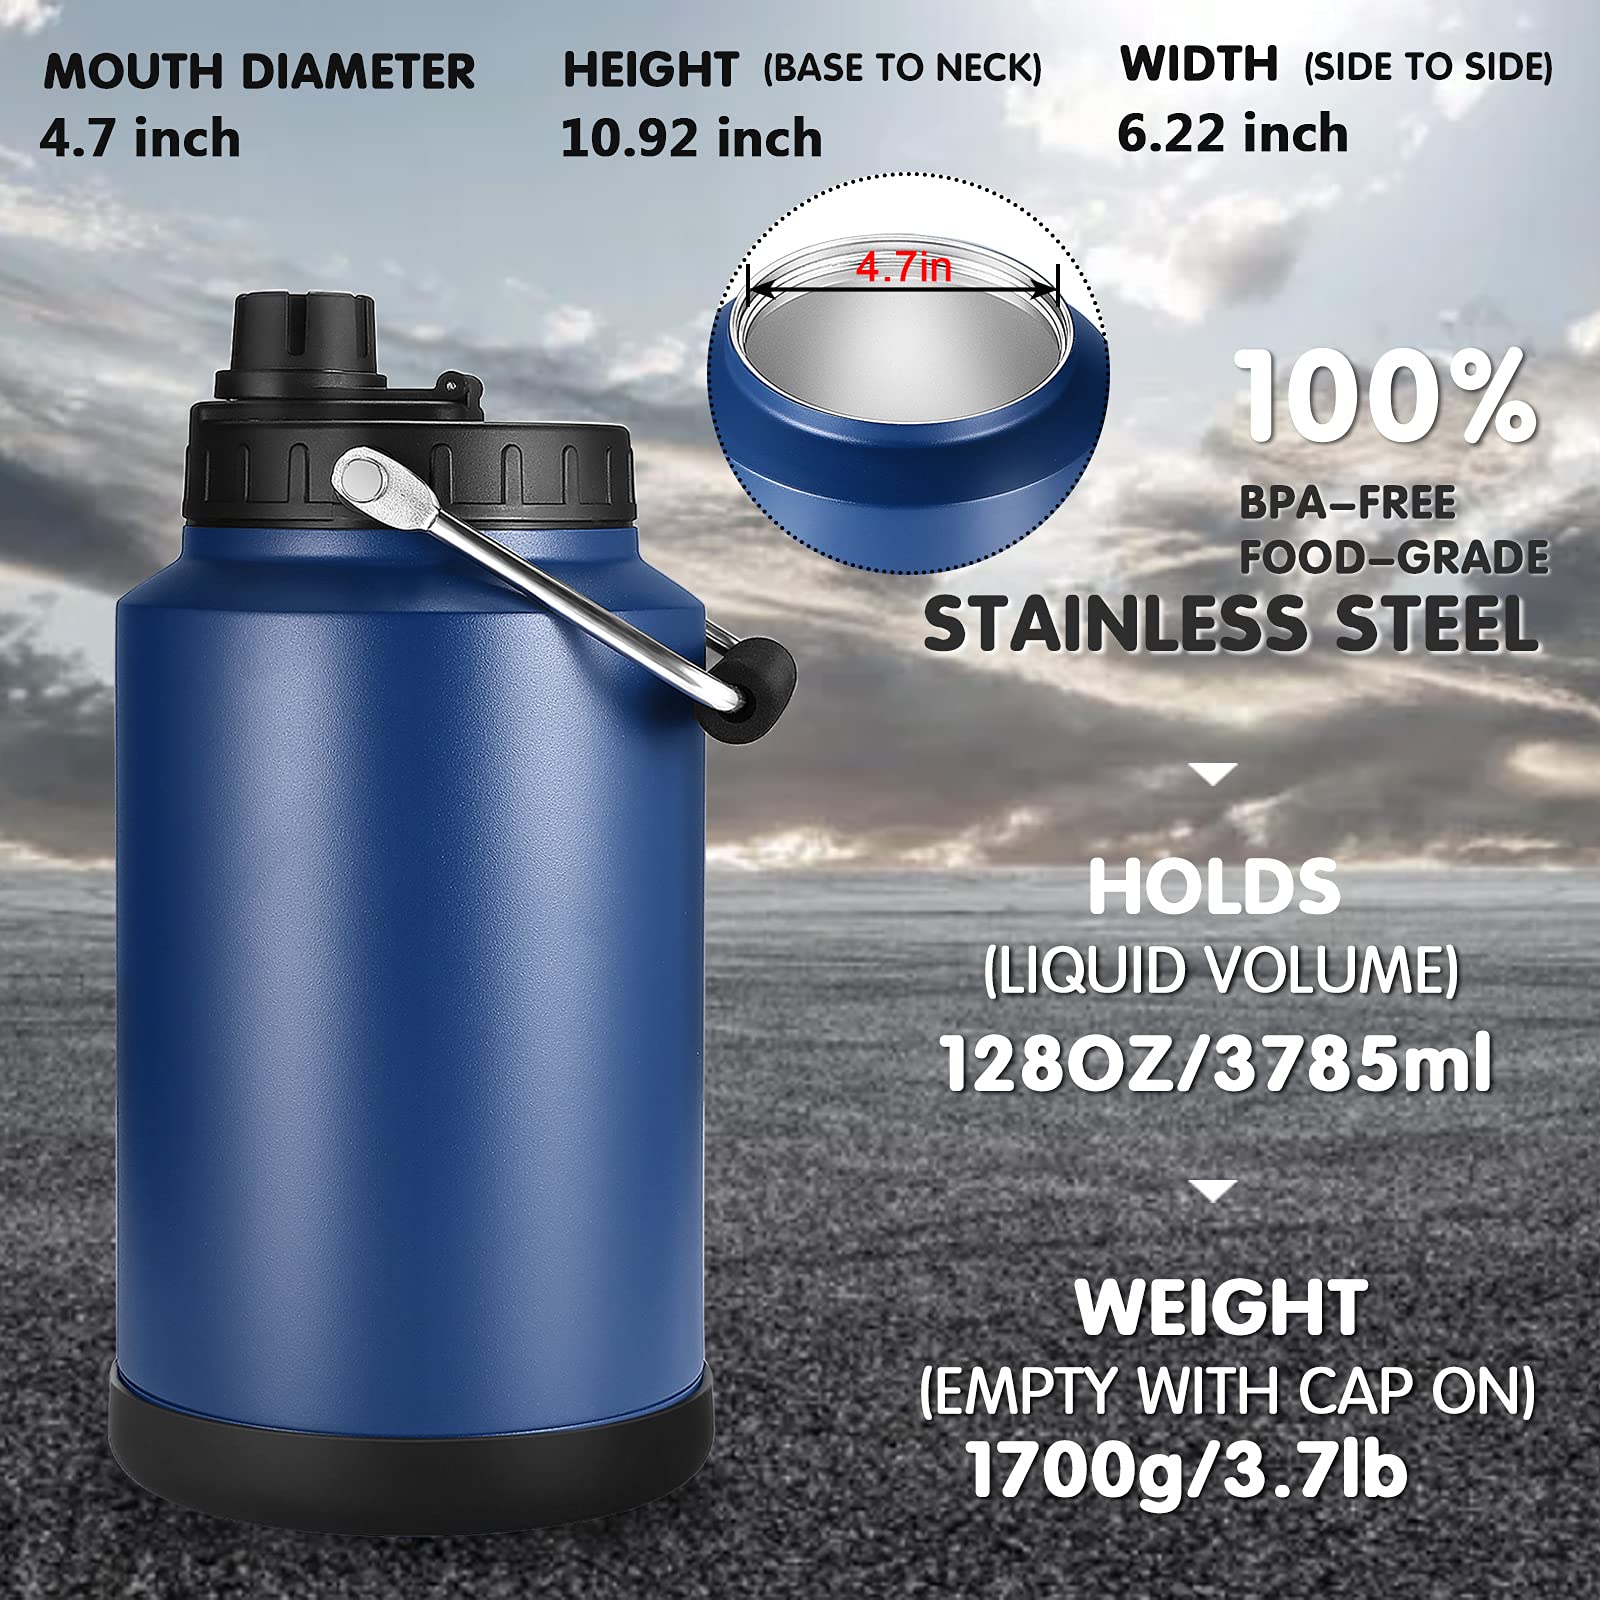 Sursip 128OZ Insulated Water Jug,One Gallon Vacuum Stainless Steel Double Walled Water Bottle with Stainless steel Handle,18/8 Food-Grade Insulated Water Bottle,Travel Drinking Water Flask-Grey